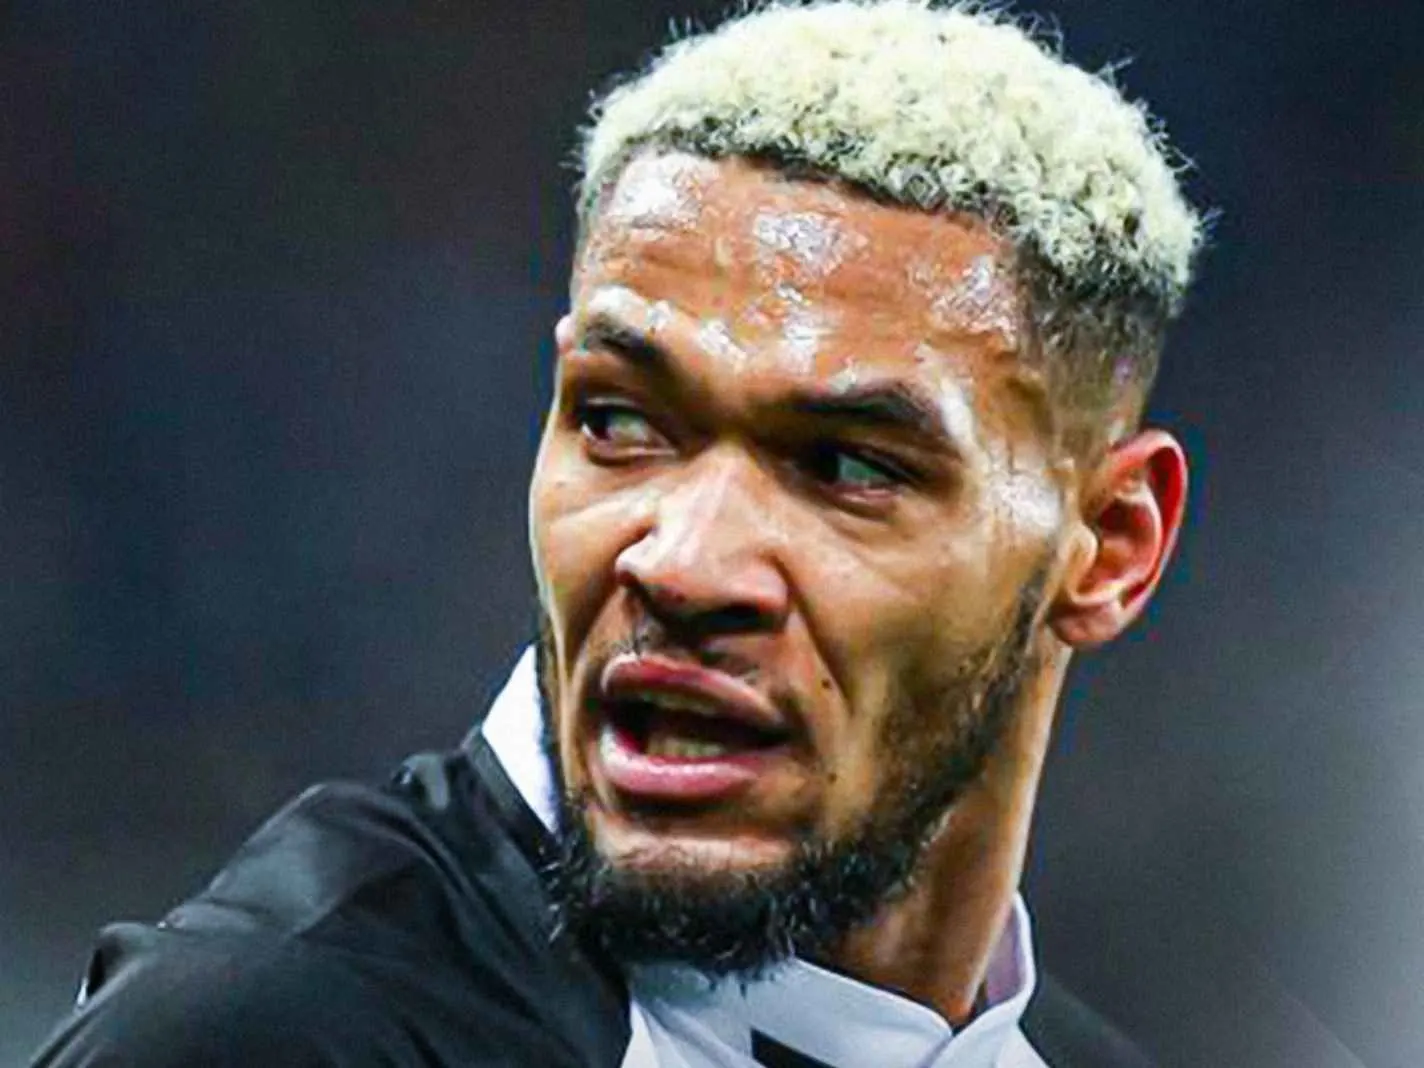 Kieran Trippier explains why Joelinton (in the photo) reminds him of former Spurs player Mousa Dembele